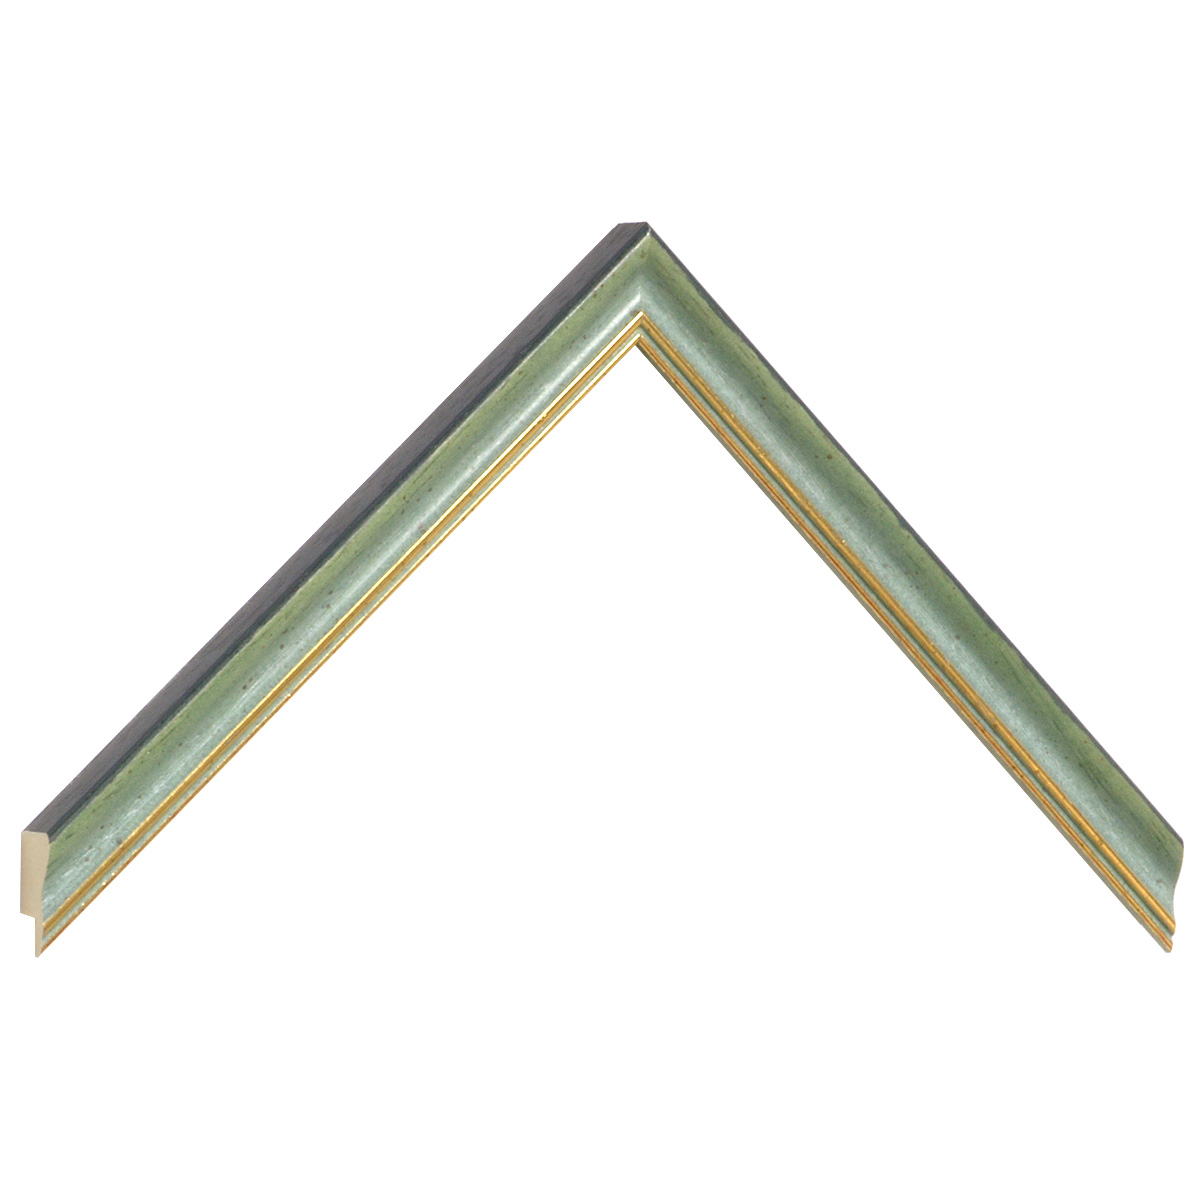 Moulding ayous width 15mm - matt green with gold edge - Sample